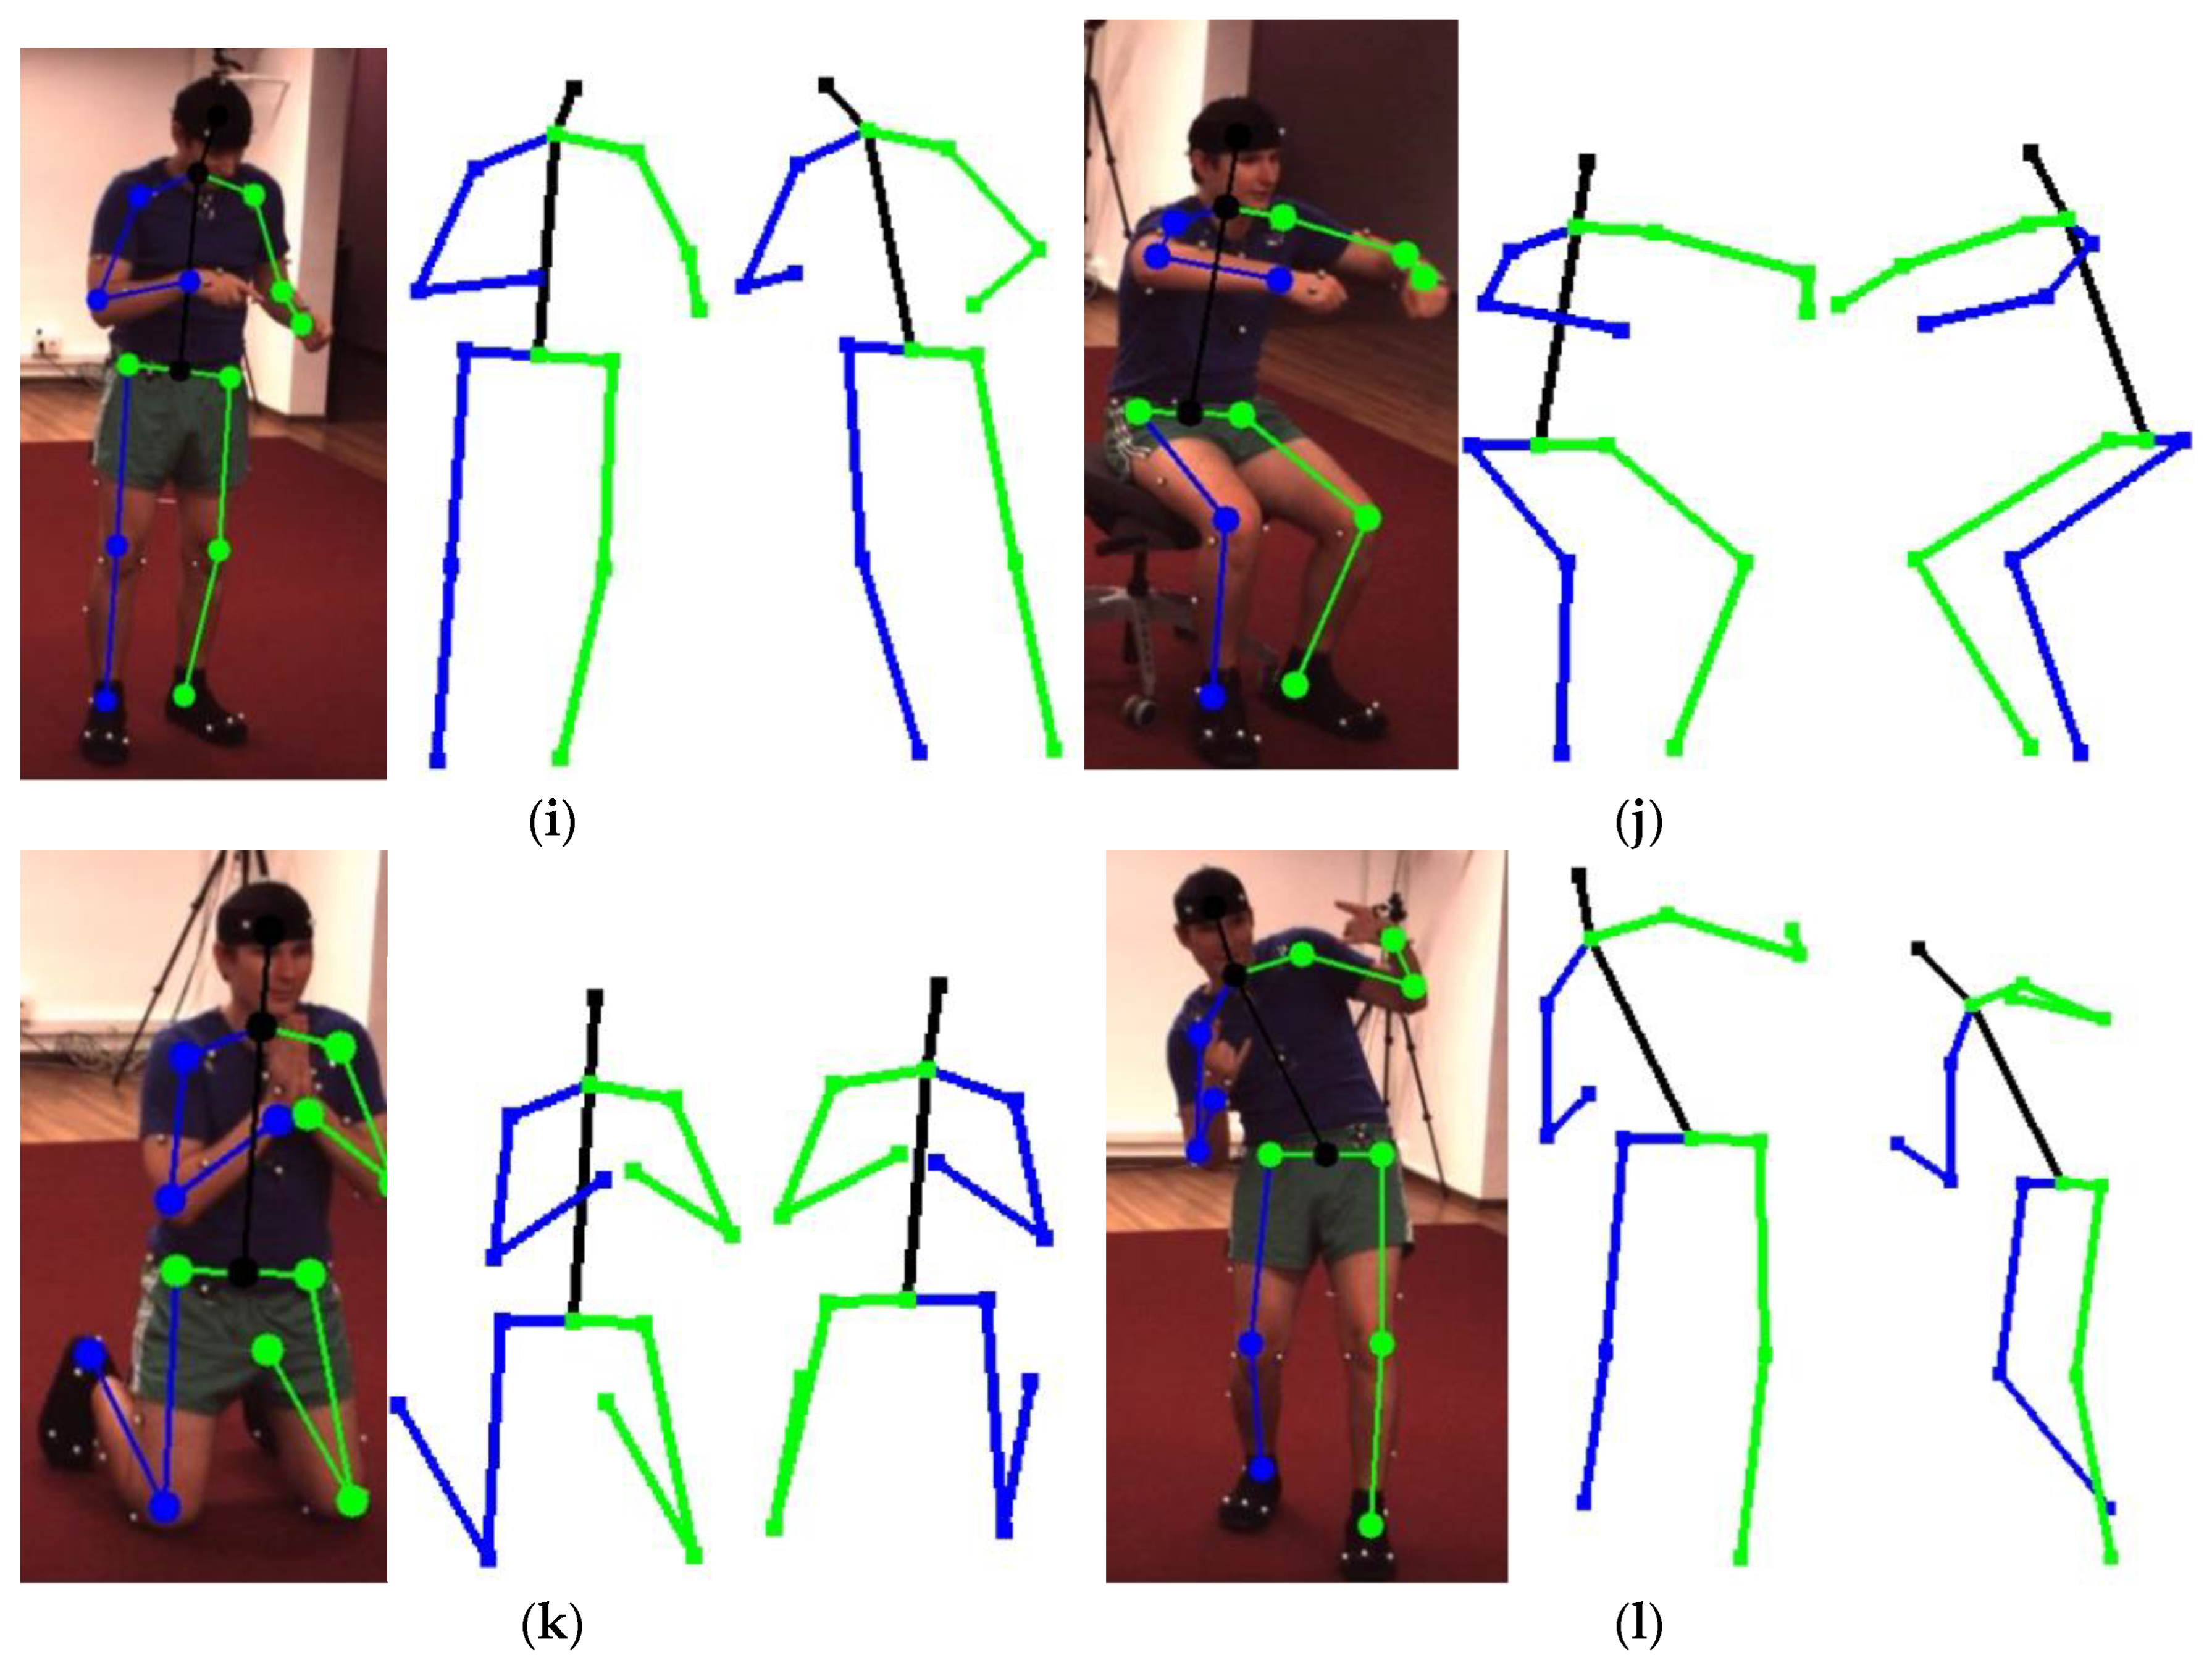 Defined Human Pose Detection for Video Surveillance